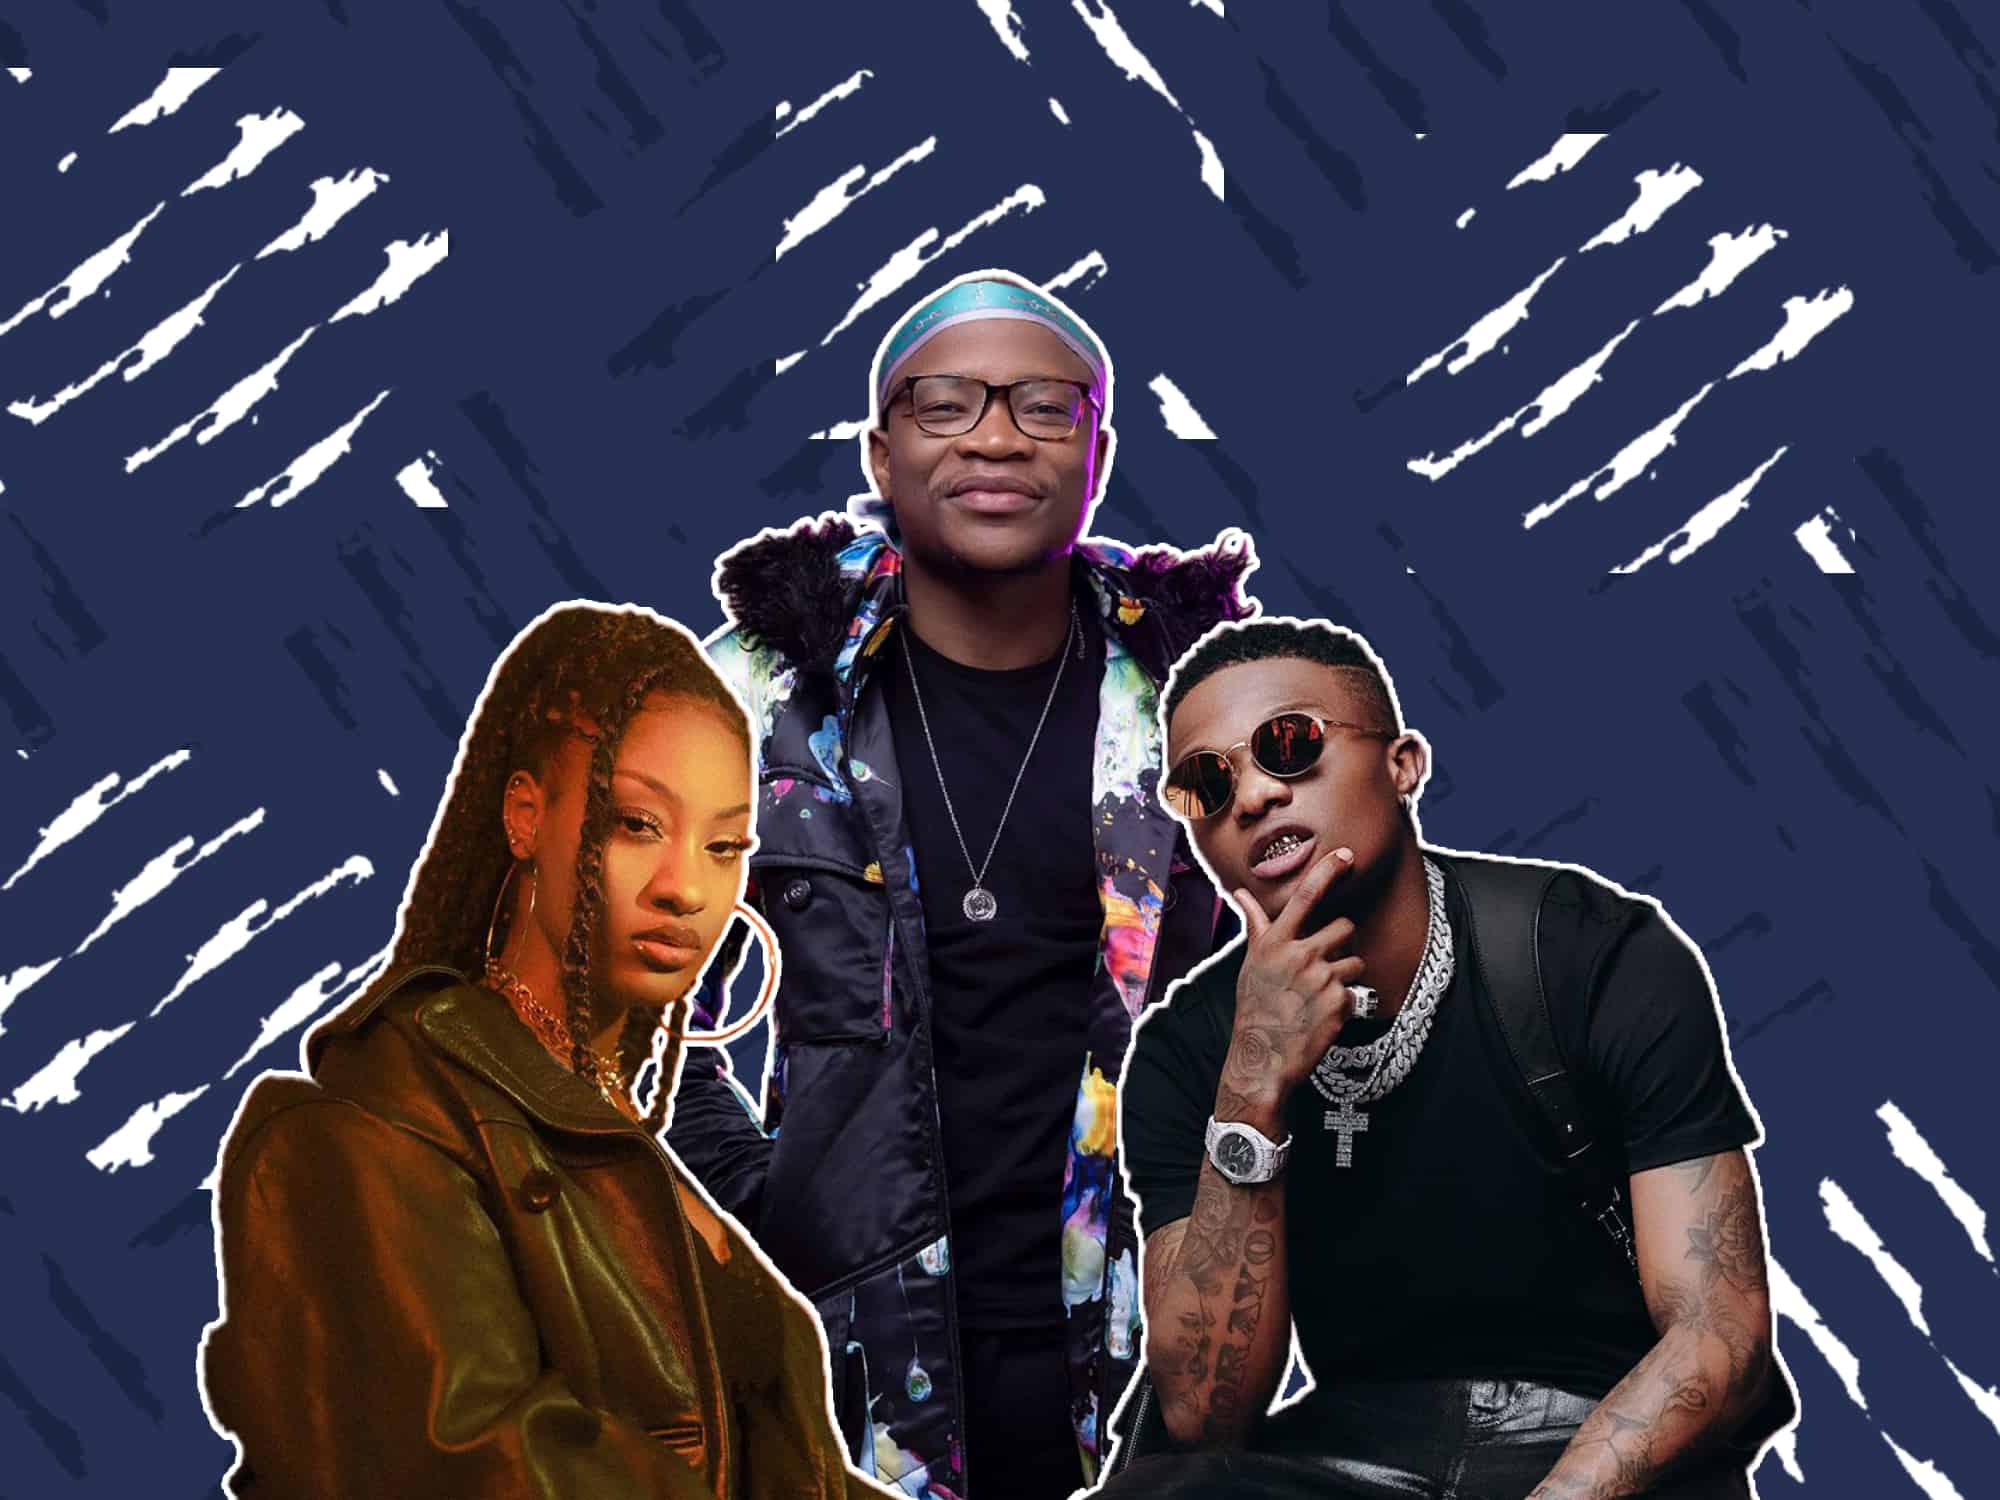 Songs Of The Summer: Master KG, Wizkid, Tems & more top this week’s charts